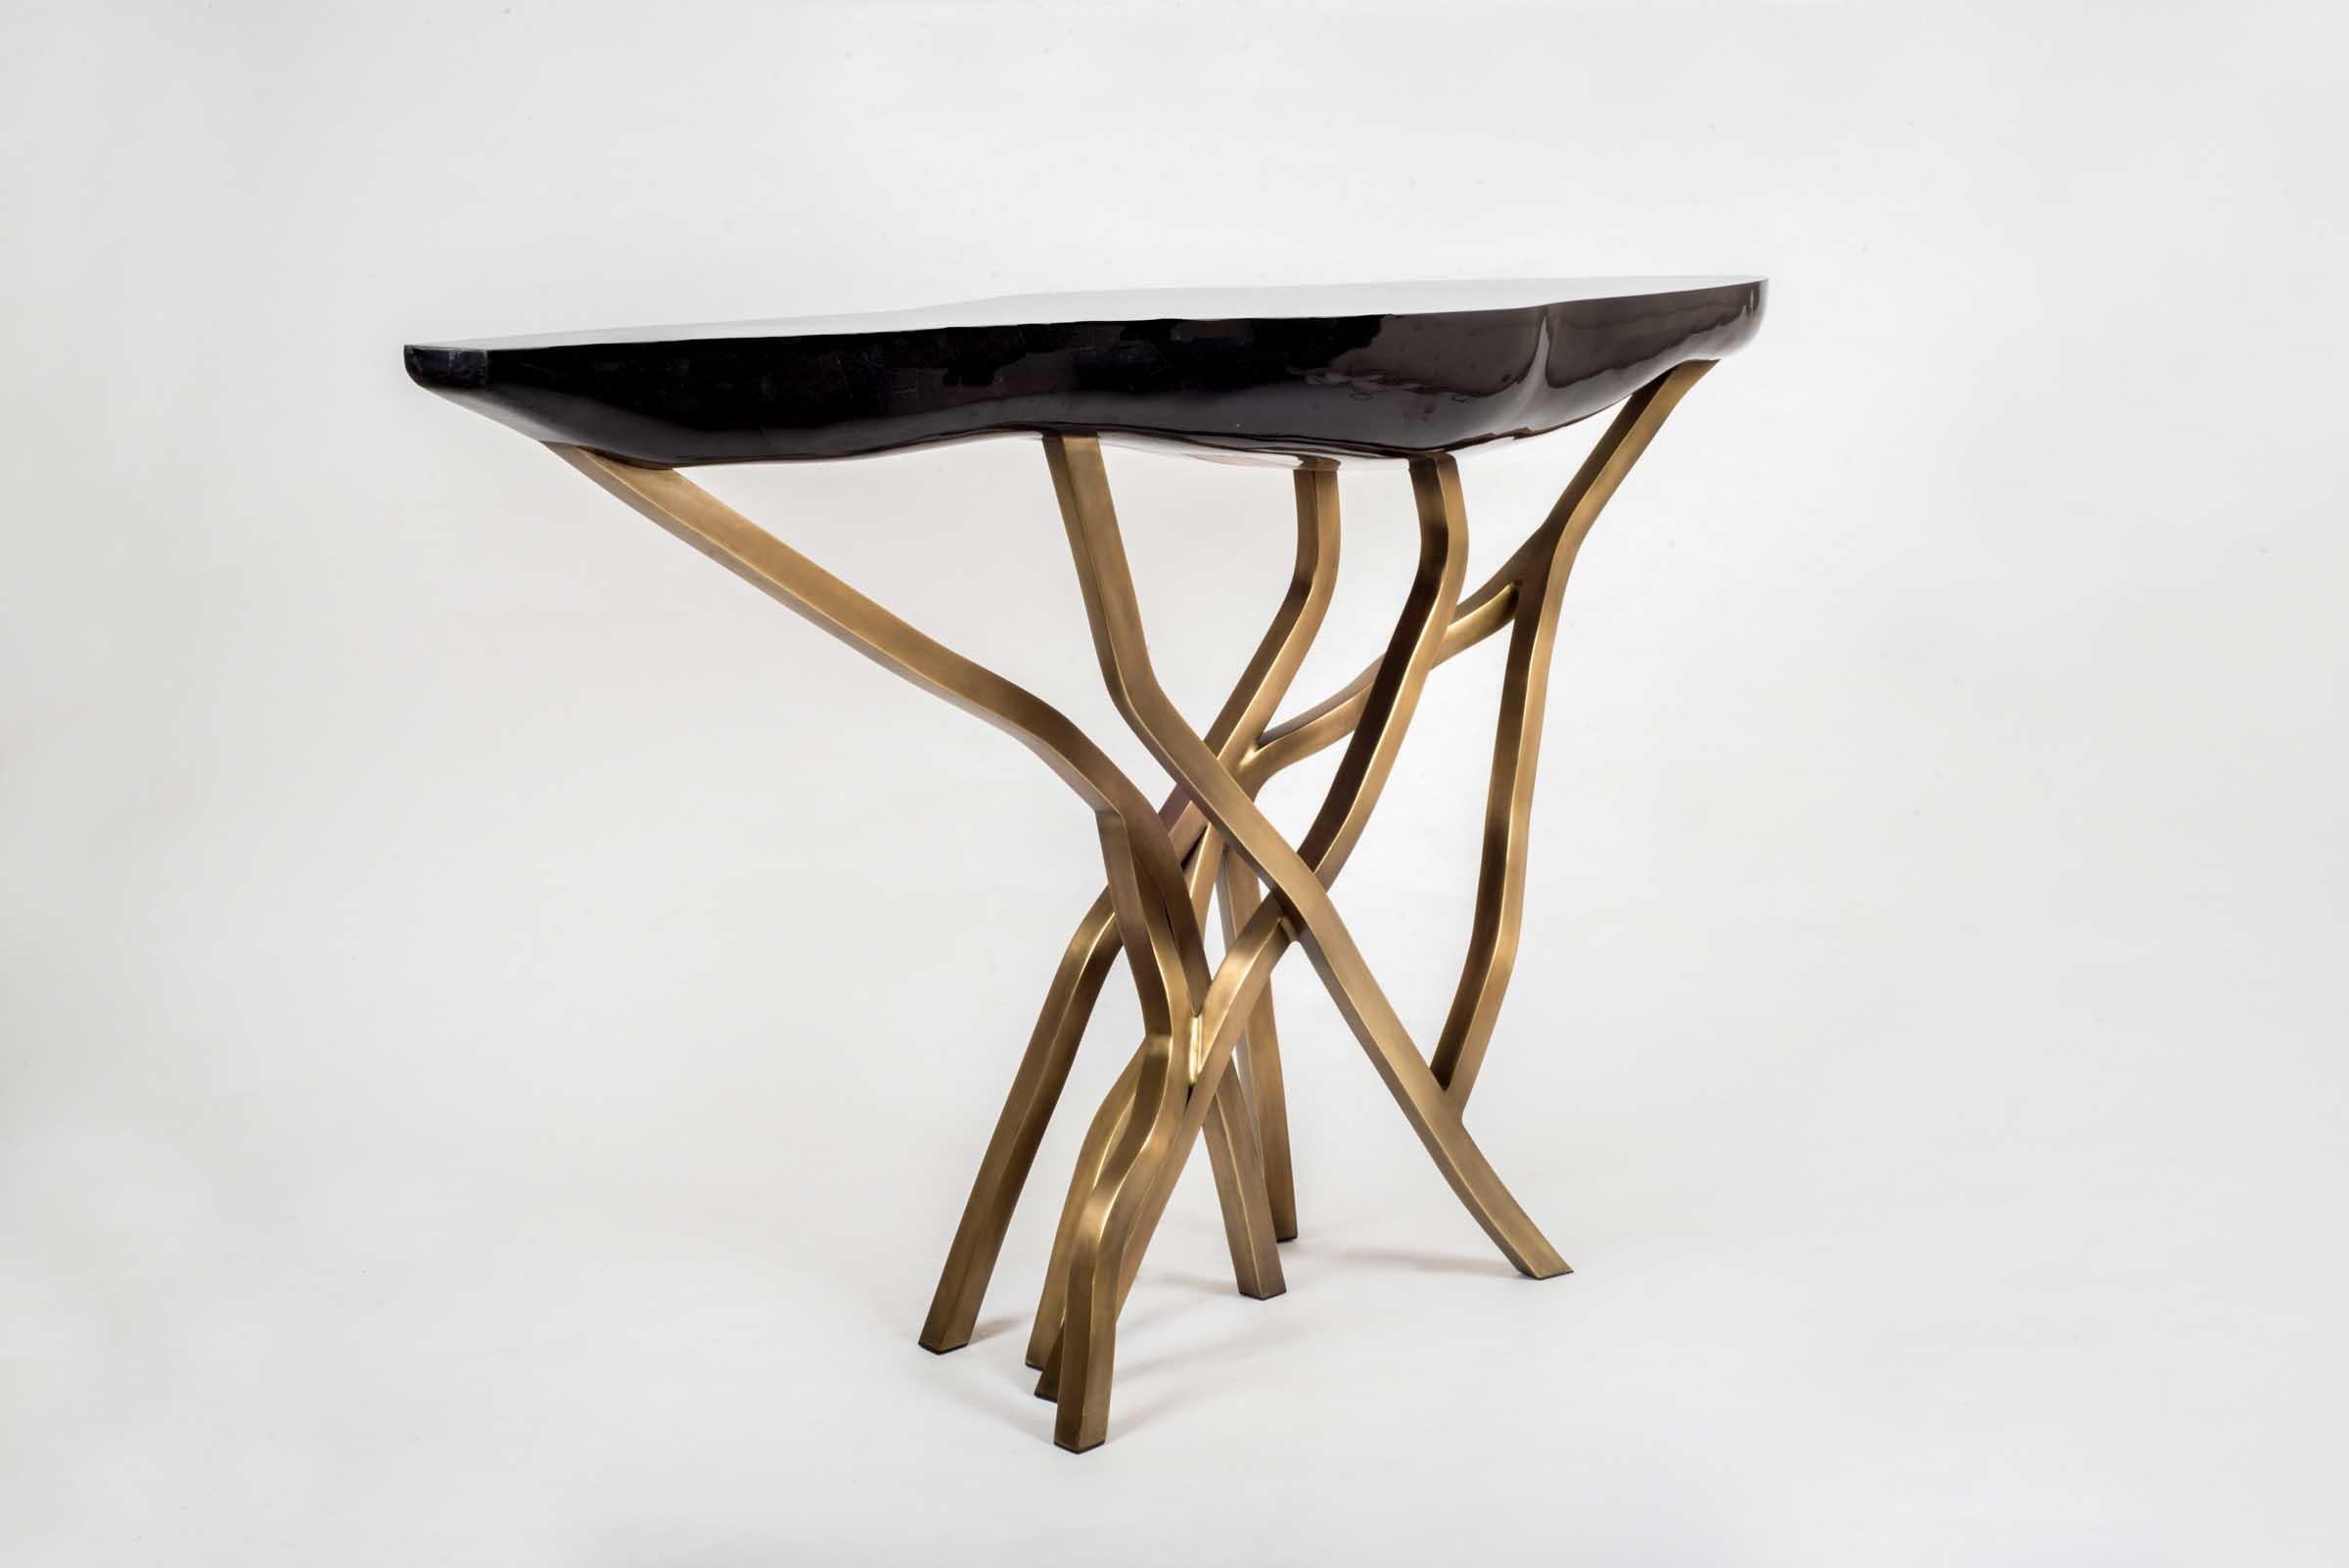 The Acacia console table makes for a dramatic statement piece in any space. The amorphous shaped top is in black pen shell and the organic shaped legs are in bronze-patina brass. The shell parts are hand selected before being inlaid, creating